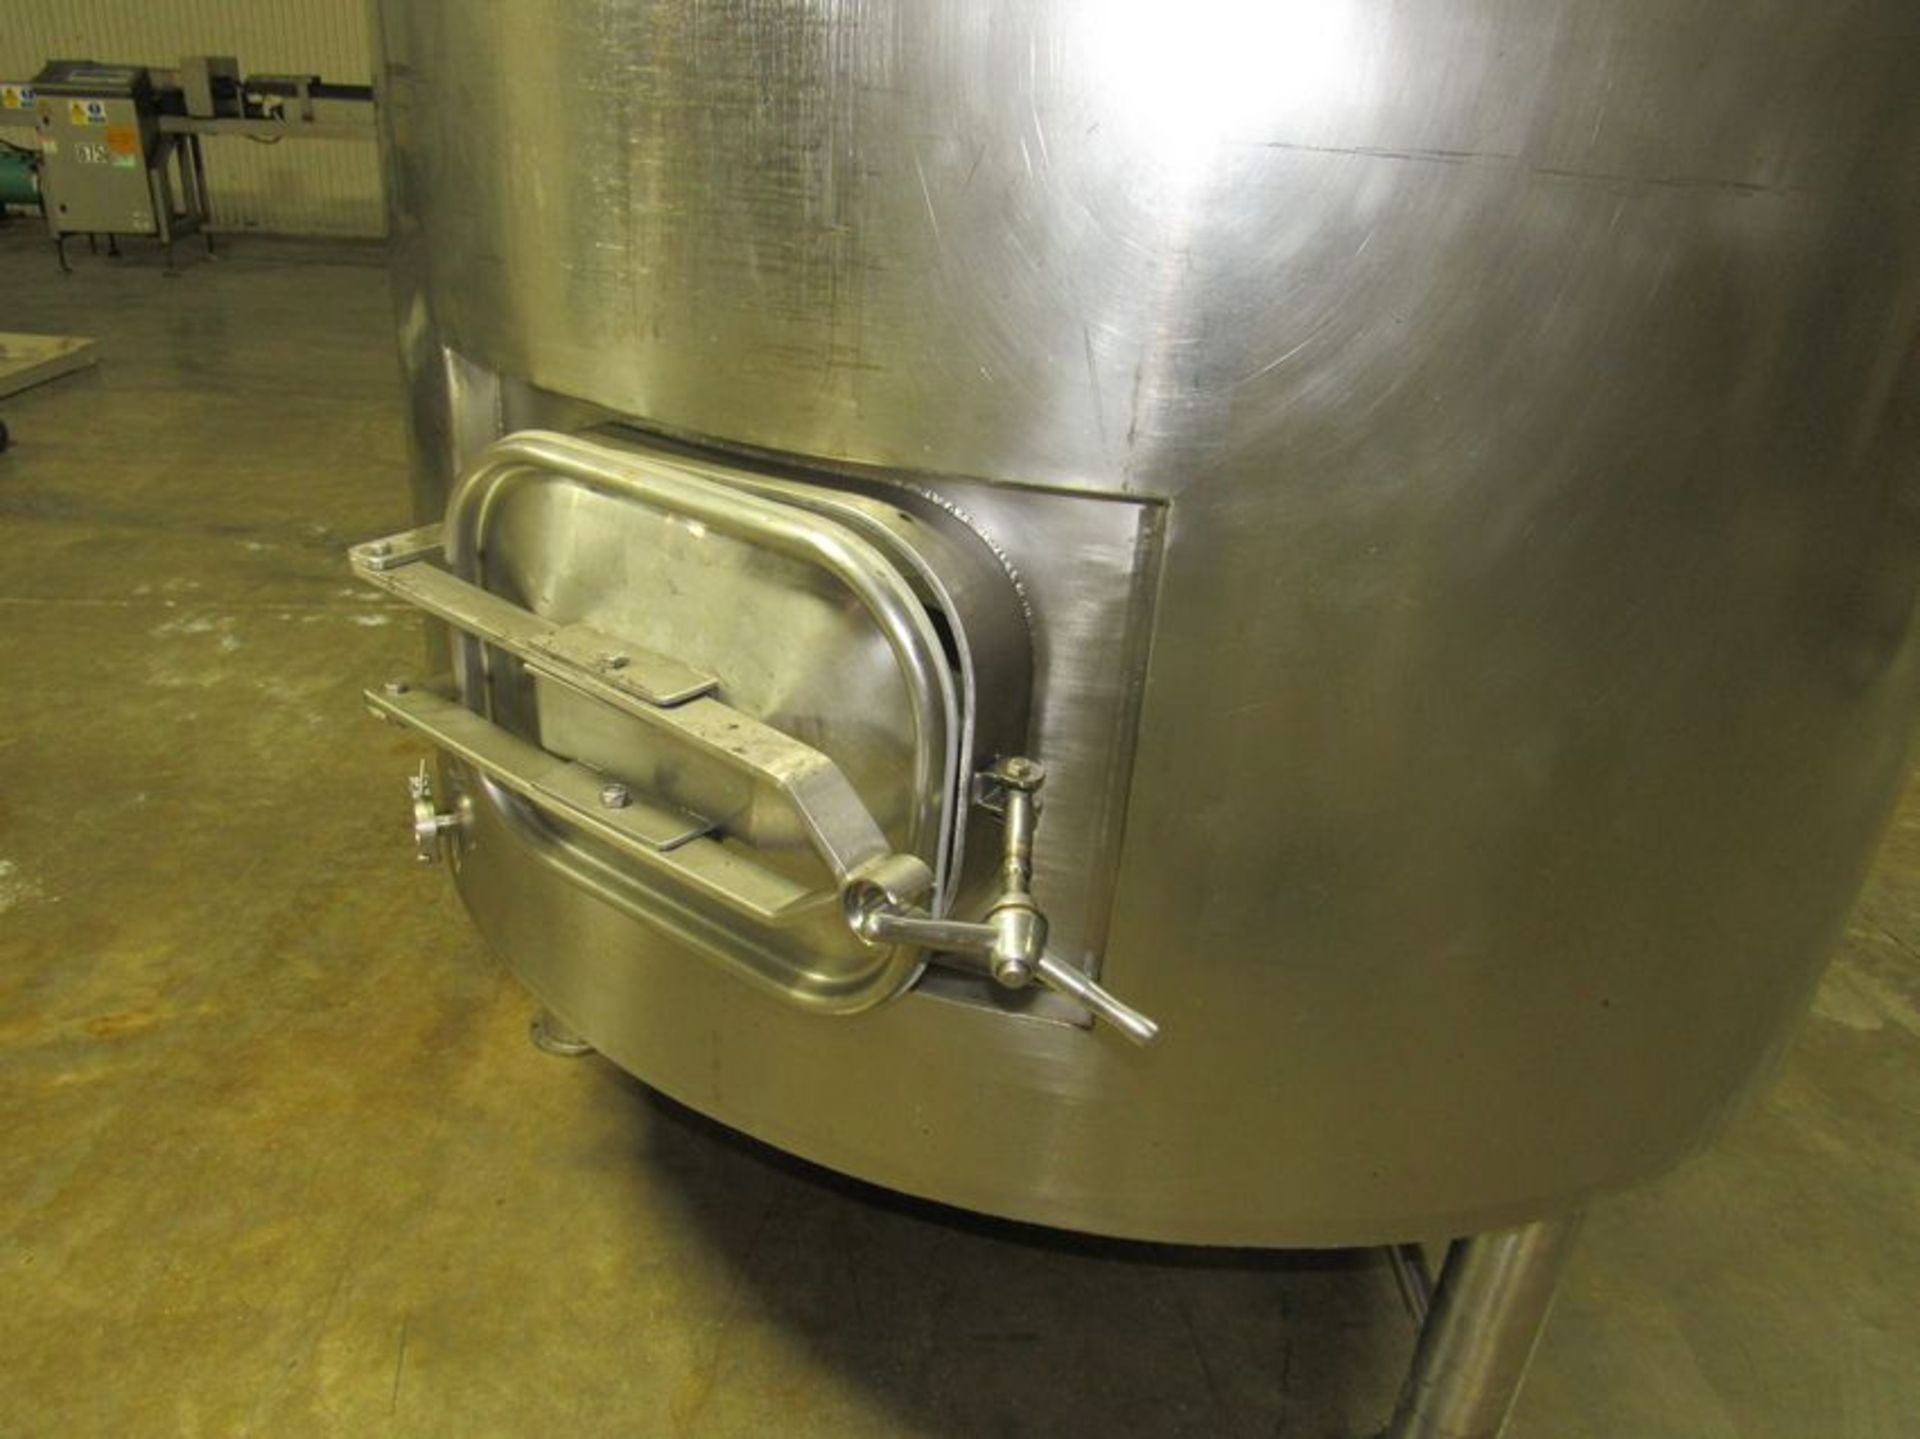 1500 liter food grade stainless steel jacketed tank in great condition. Inside approx. 4ft ft. dia - Image 7 of 11